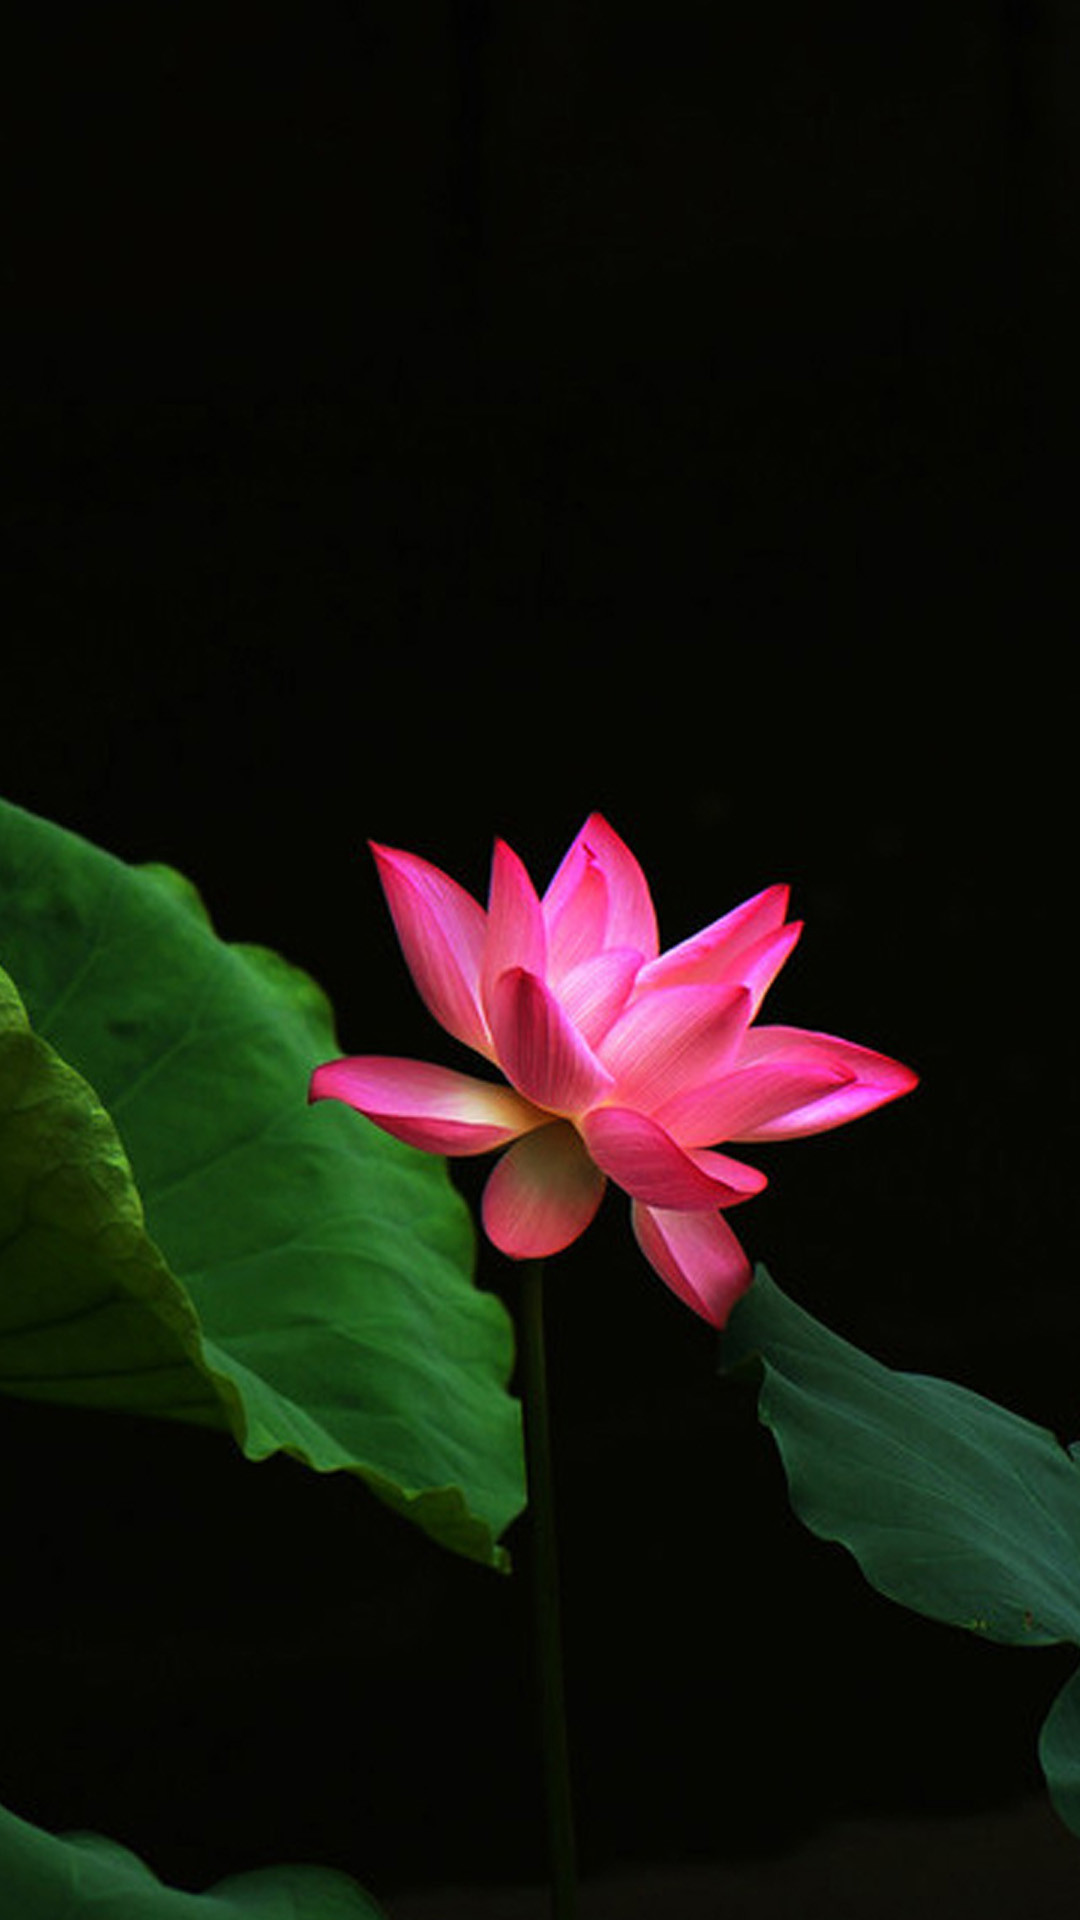 1080x1920 Red Lotus Flower Galaxy Note 3 Wallpapers